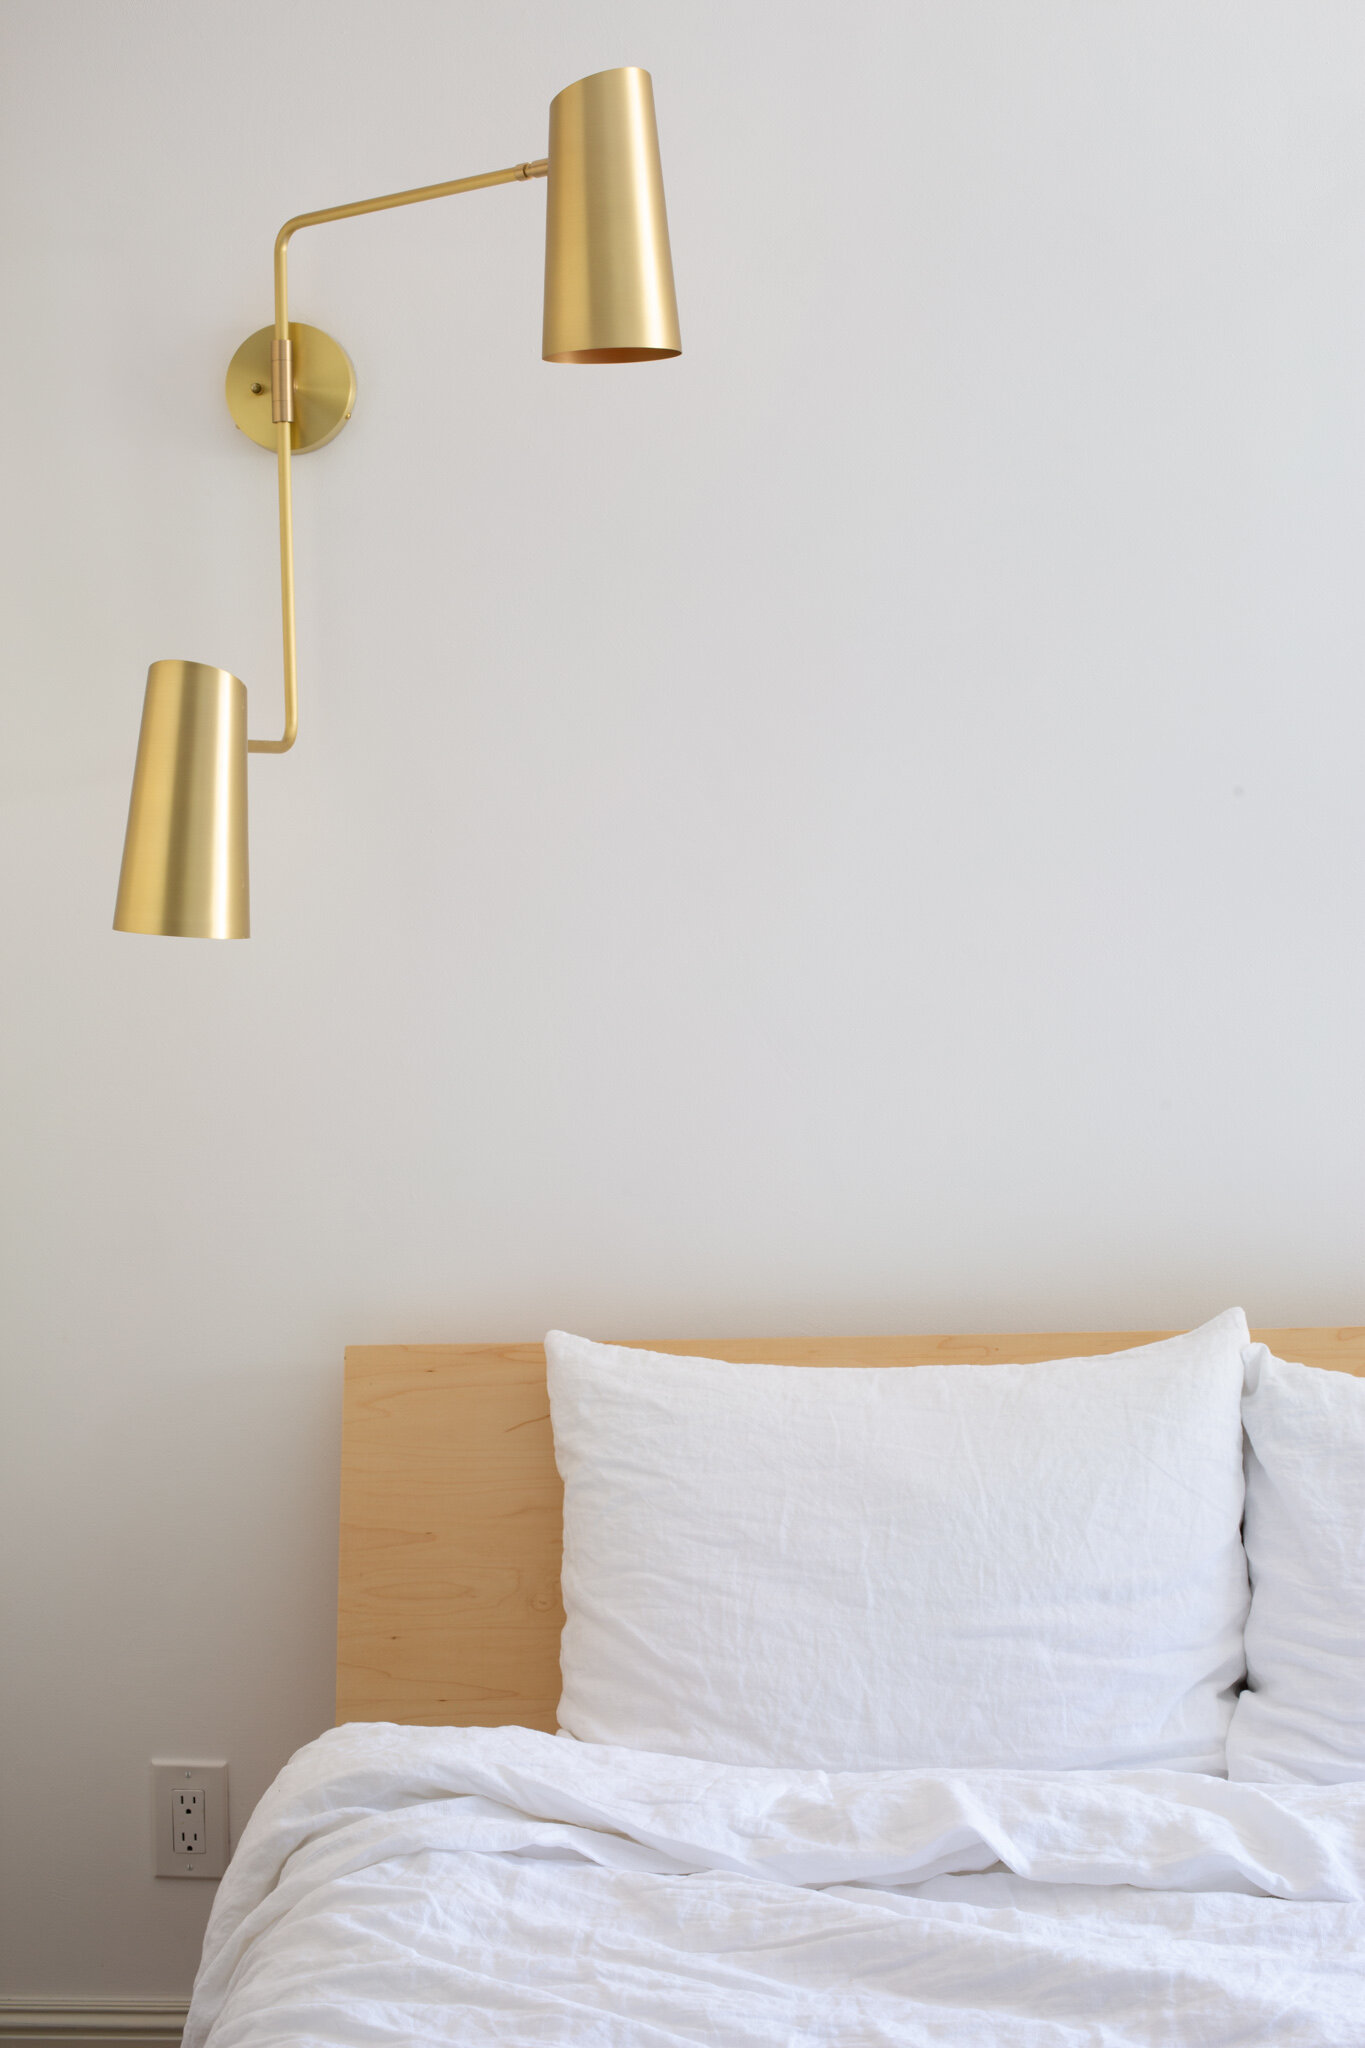  The double swing arm lamp provides reading light over the bed while staying clear of the wardrobe doors. 